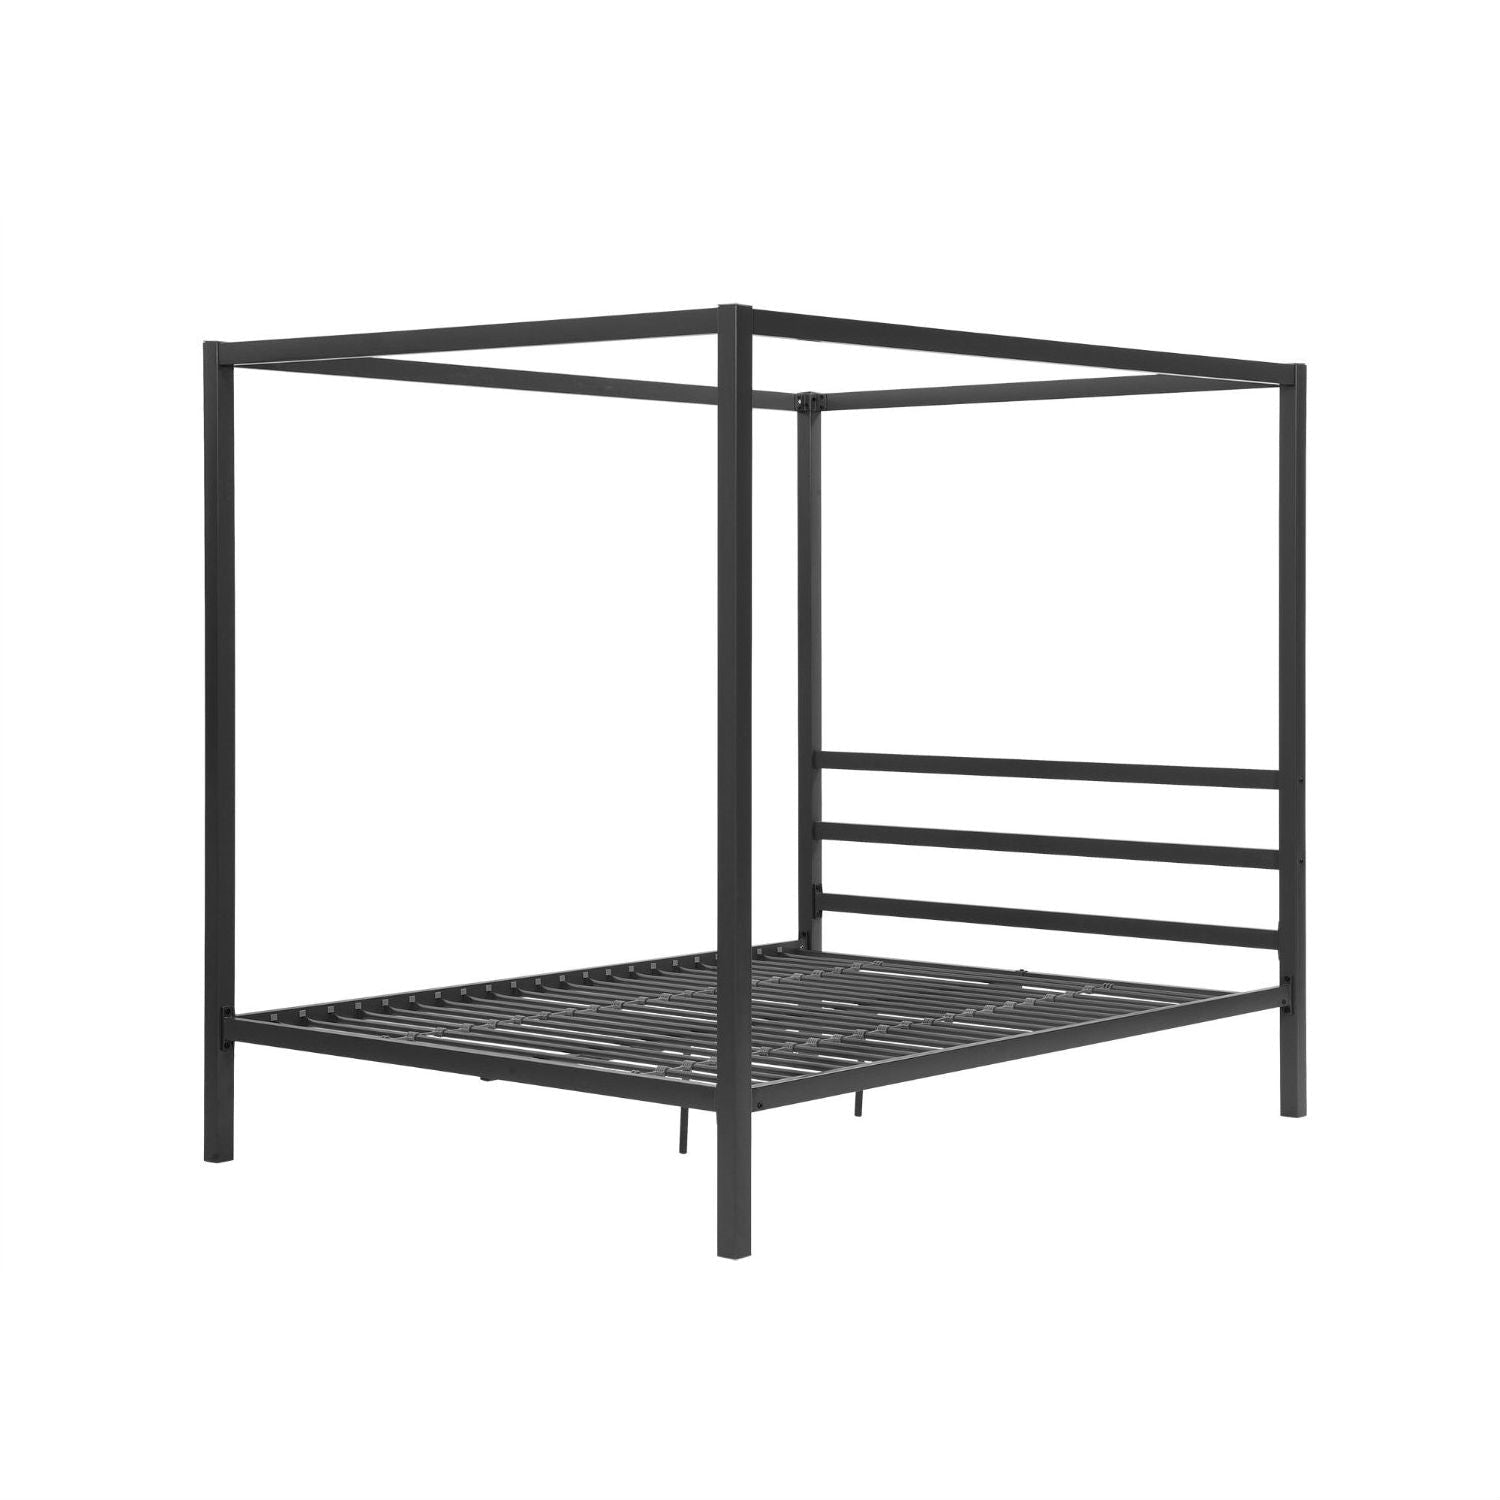 Bedroom > Bed Frames > Canopy Beds - Queen Size Modern Canopy Bed In Sturdy Grey Metal